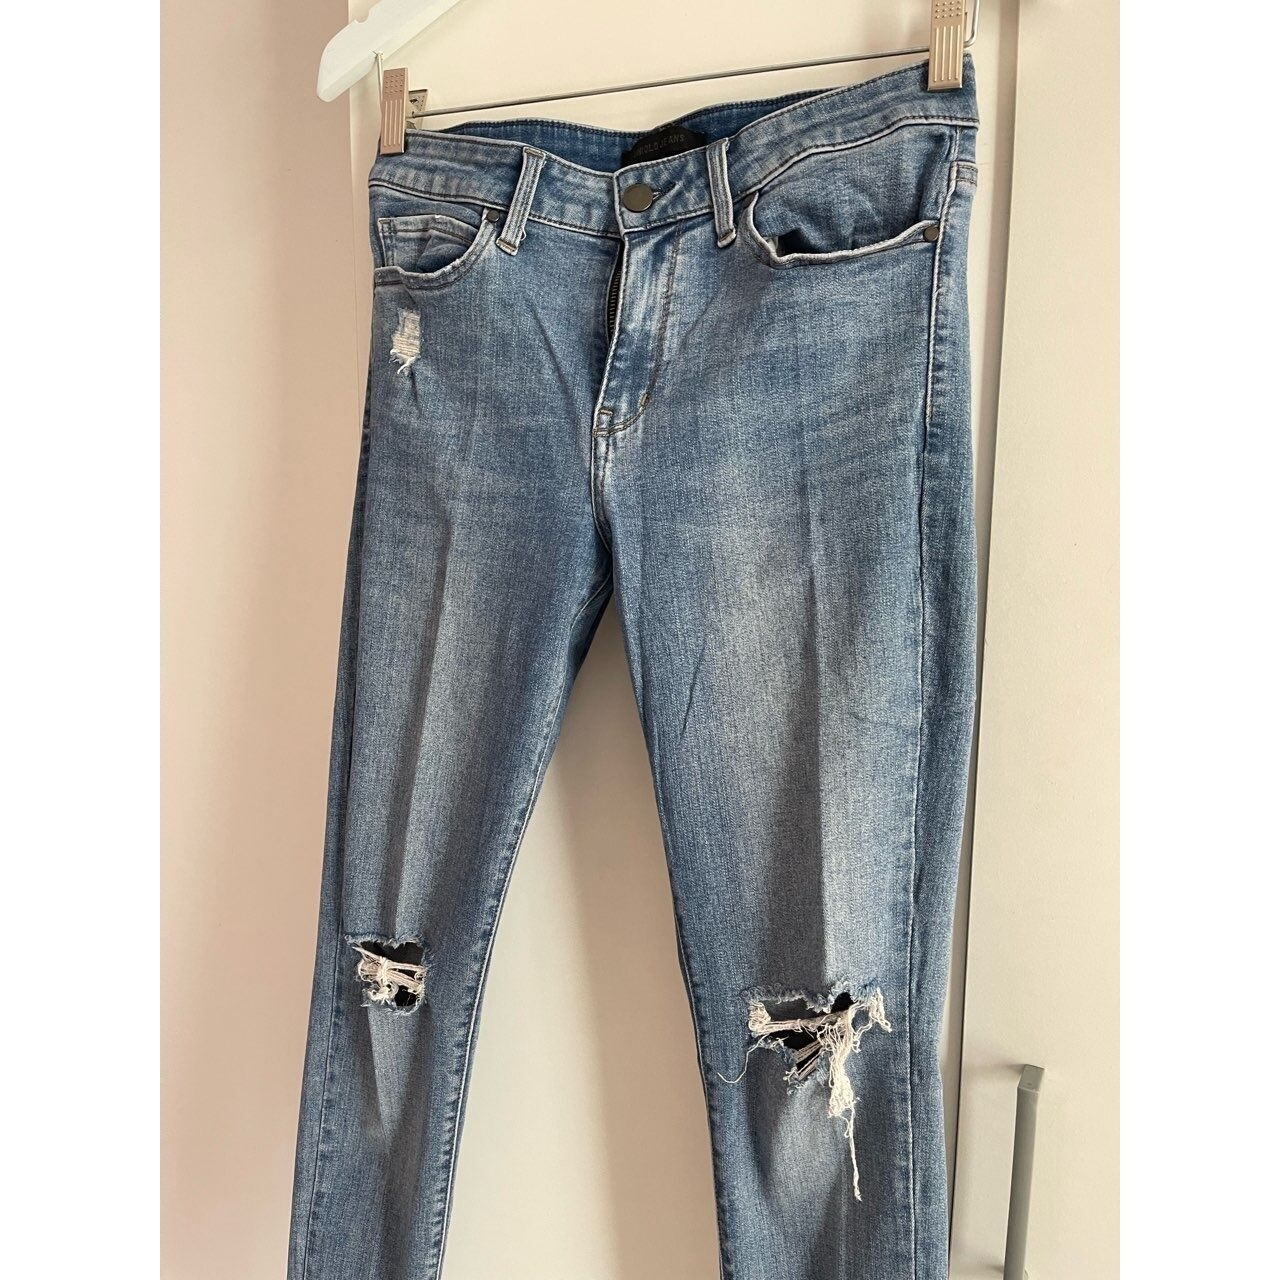 UNIQLO Blue Ripped Jeans Long Pants